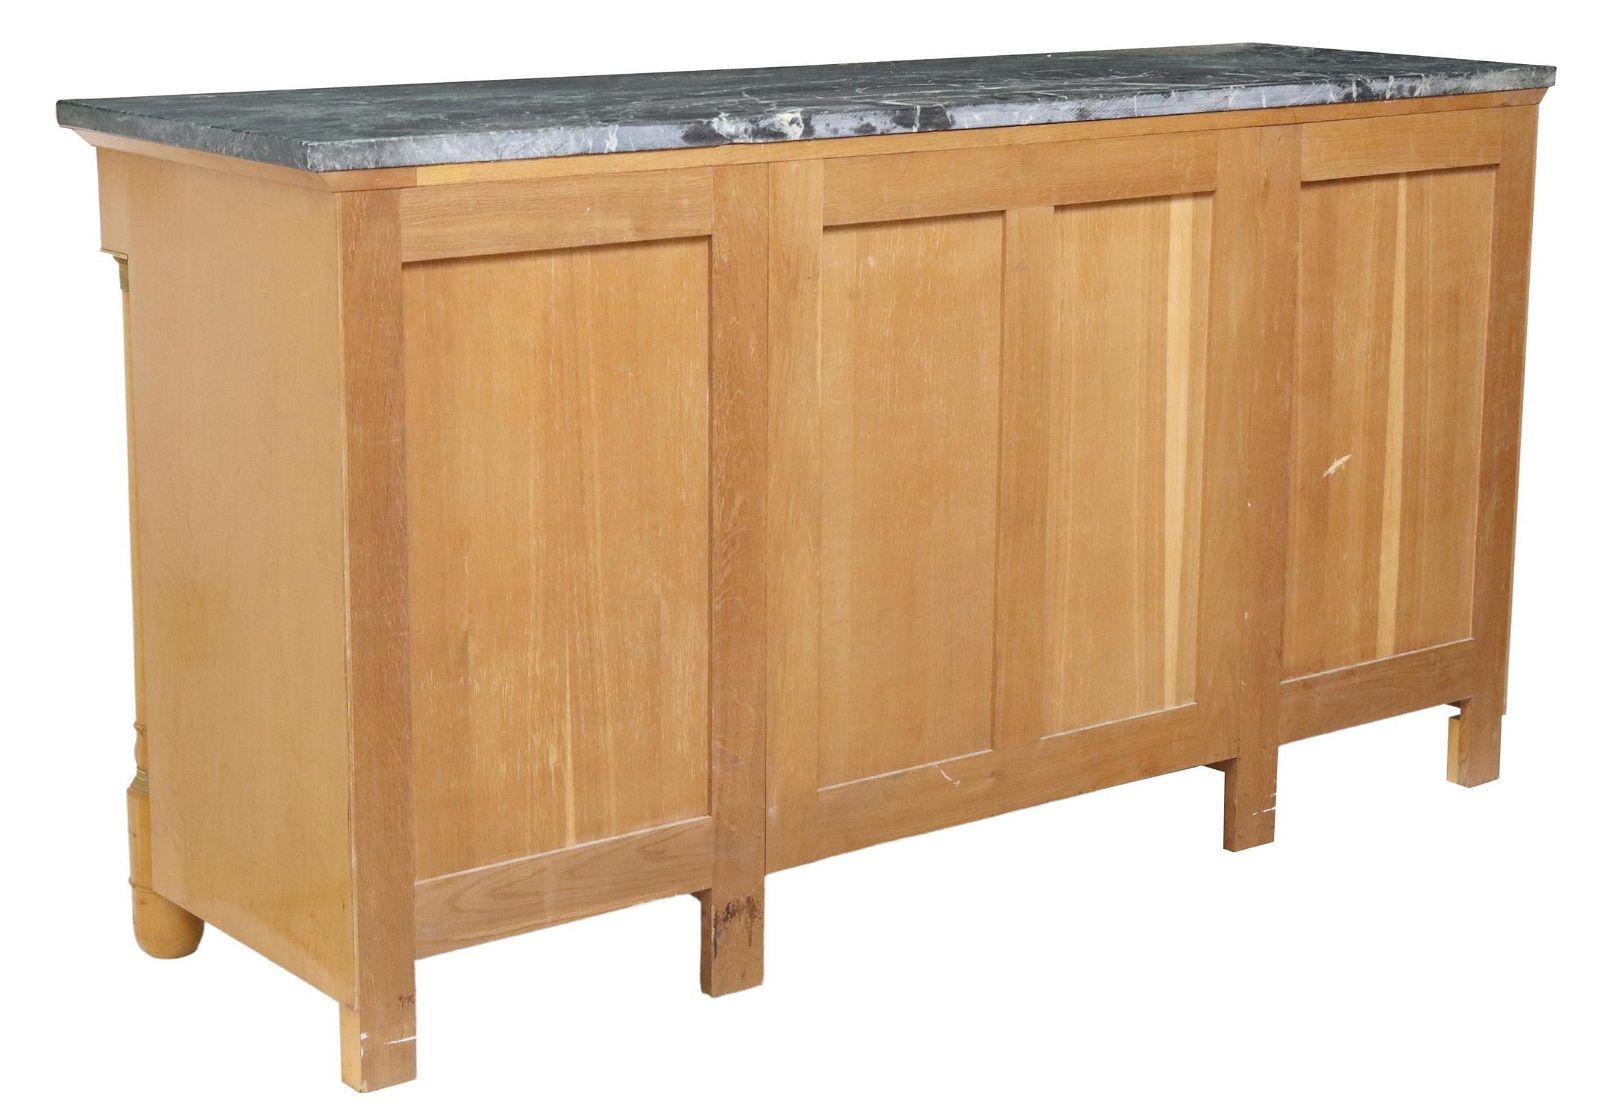 20th Century Vintage French Empire Style Green Marble-Top Birdseye Maple Sideboard For Sale